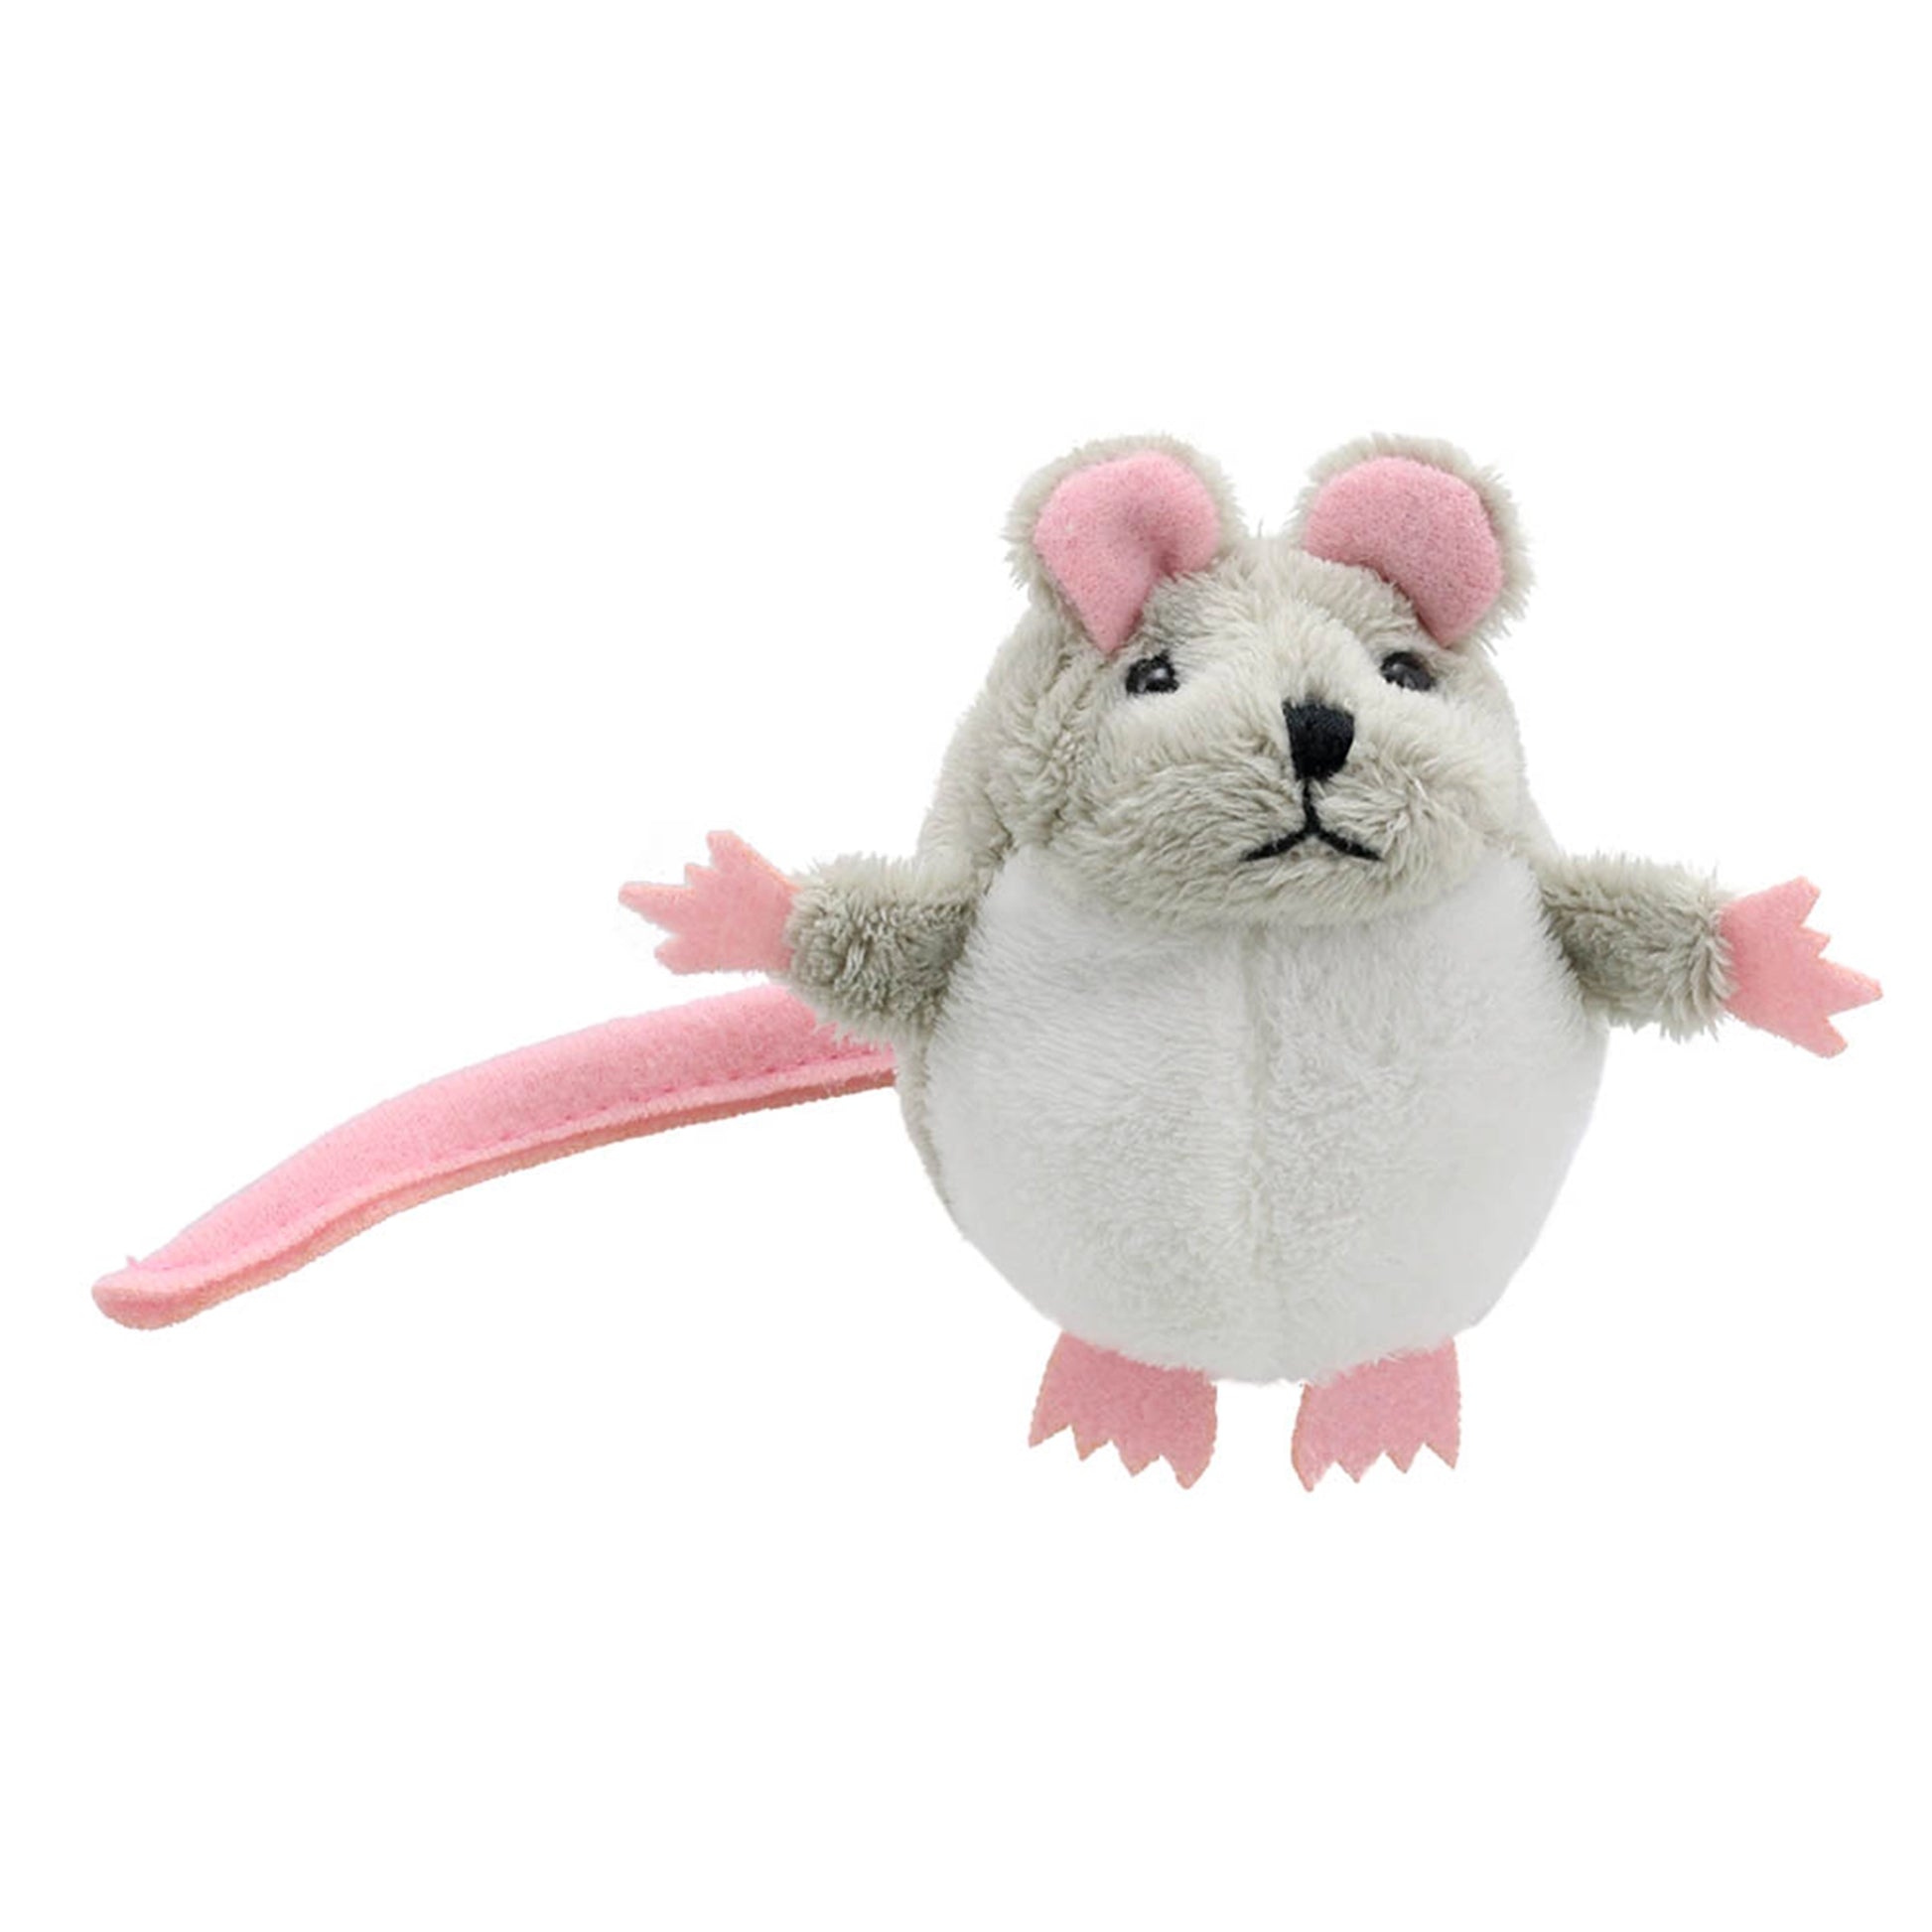 Mouse (Grey) Finger Puppet - The Puppet Company - The Forgotten Toy Shop